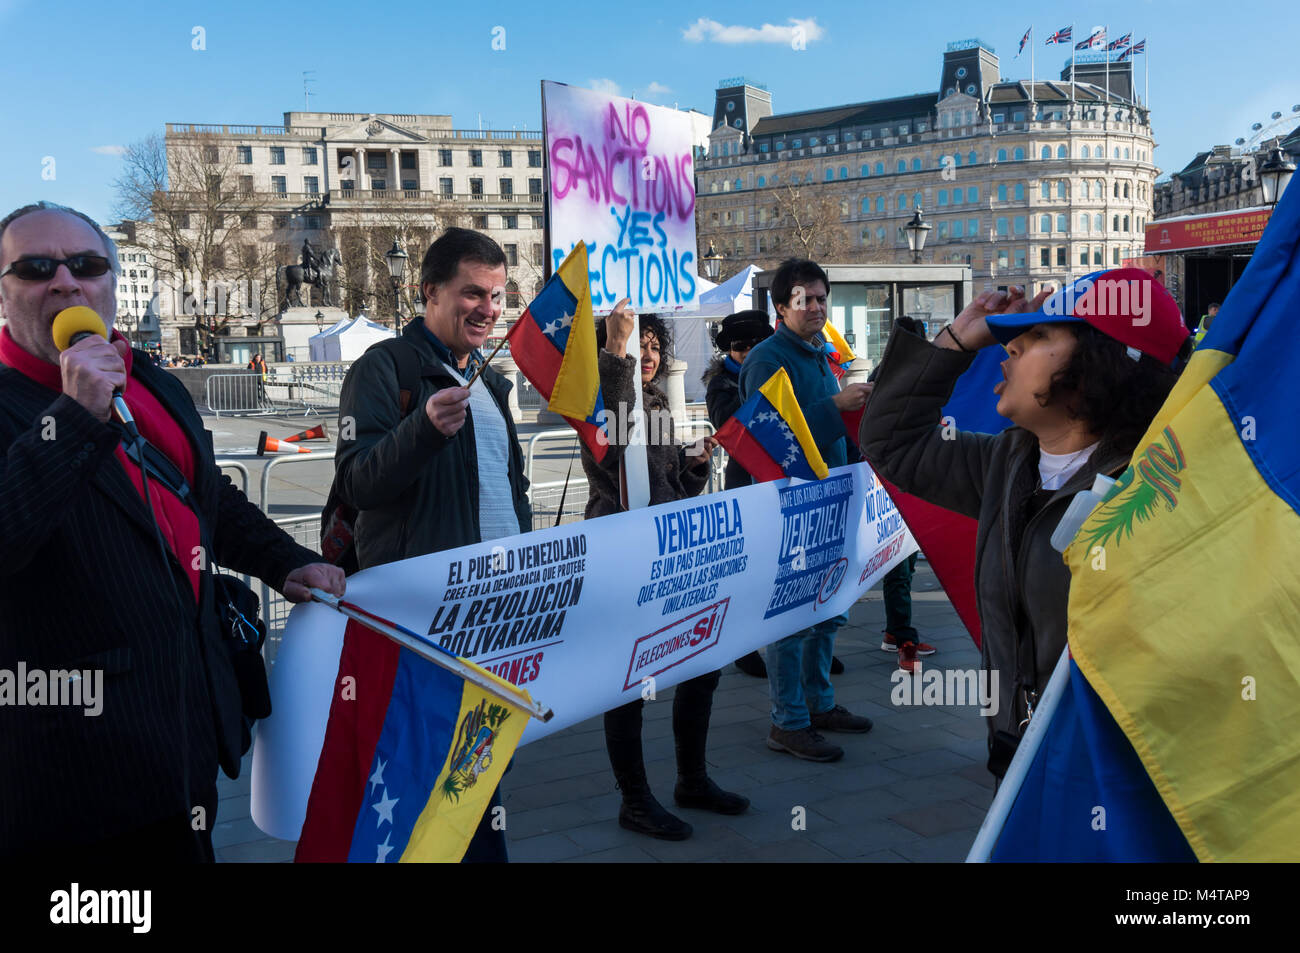 February 17, 2018 - London, UK. 17th February 2018. An emergency rally in Trafalgar Square calls of an end to EU and US economic and diplomatic sanctions against Venezuela in support of the interests of international corporations which make it difficult for the country to recover after the collapse of oil prices in 2015. The latest attack on the country is the US rejection of the 22nd April 2018 election, an attack on Venezuelan sovereignty and the country's right to determine its own destiny. Protesters laugh at two women carrying upside-down Venezuelan flags came to interrupt the protest an Stock Photo